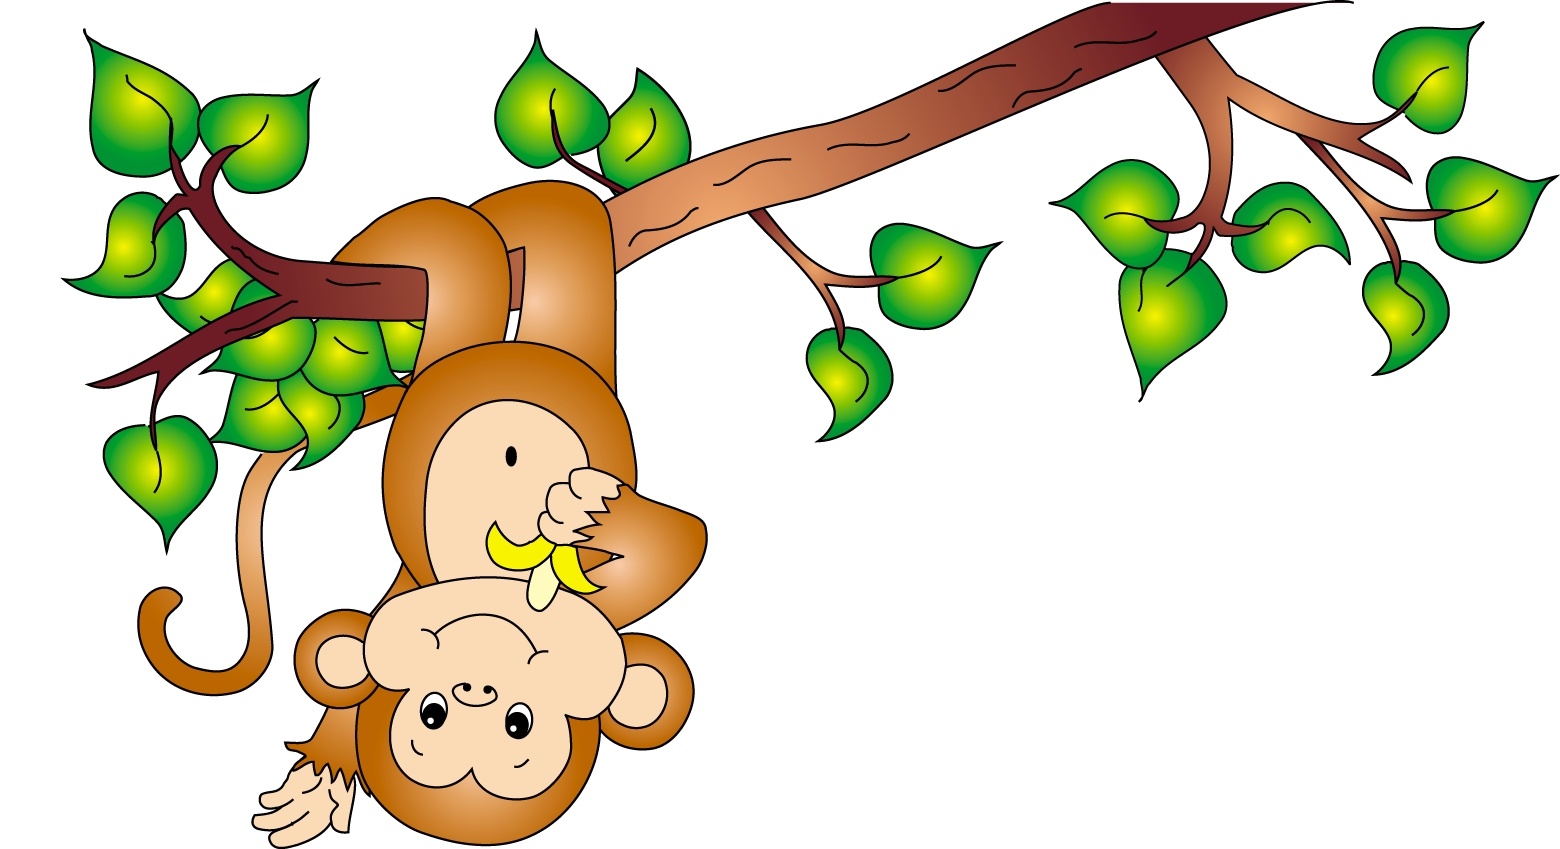 Monkey coloring pages for children - Monkeys Kids Coloring Pages